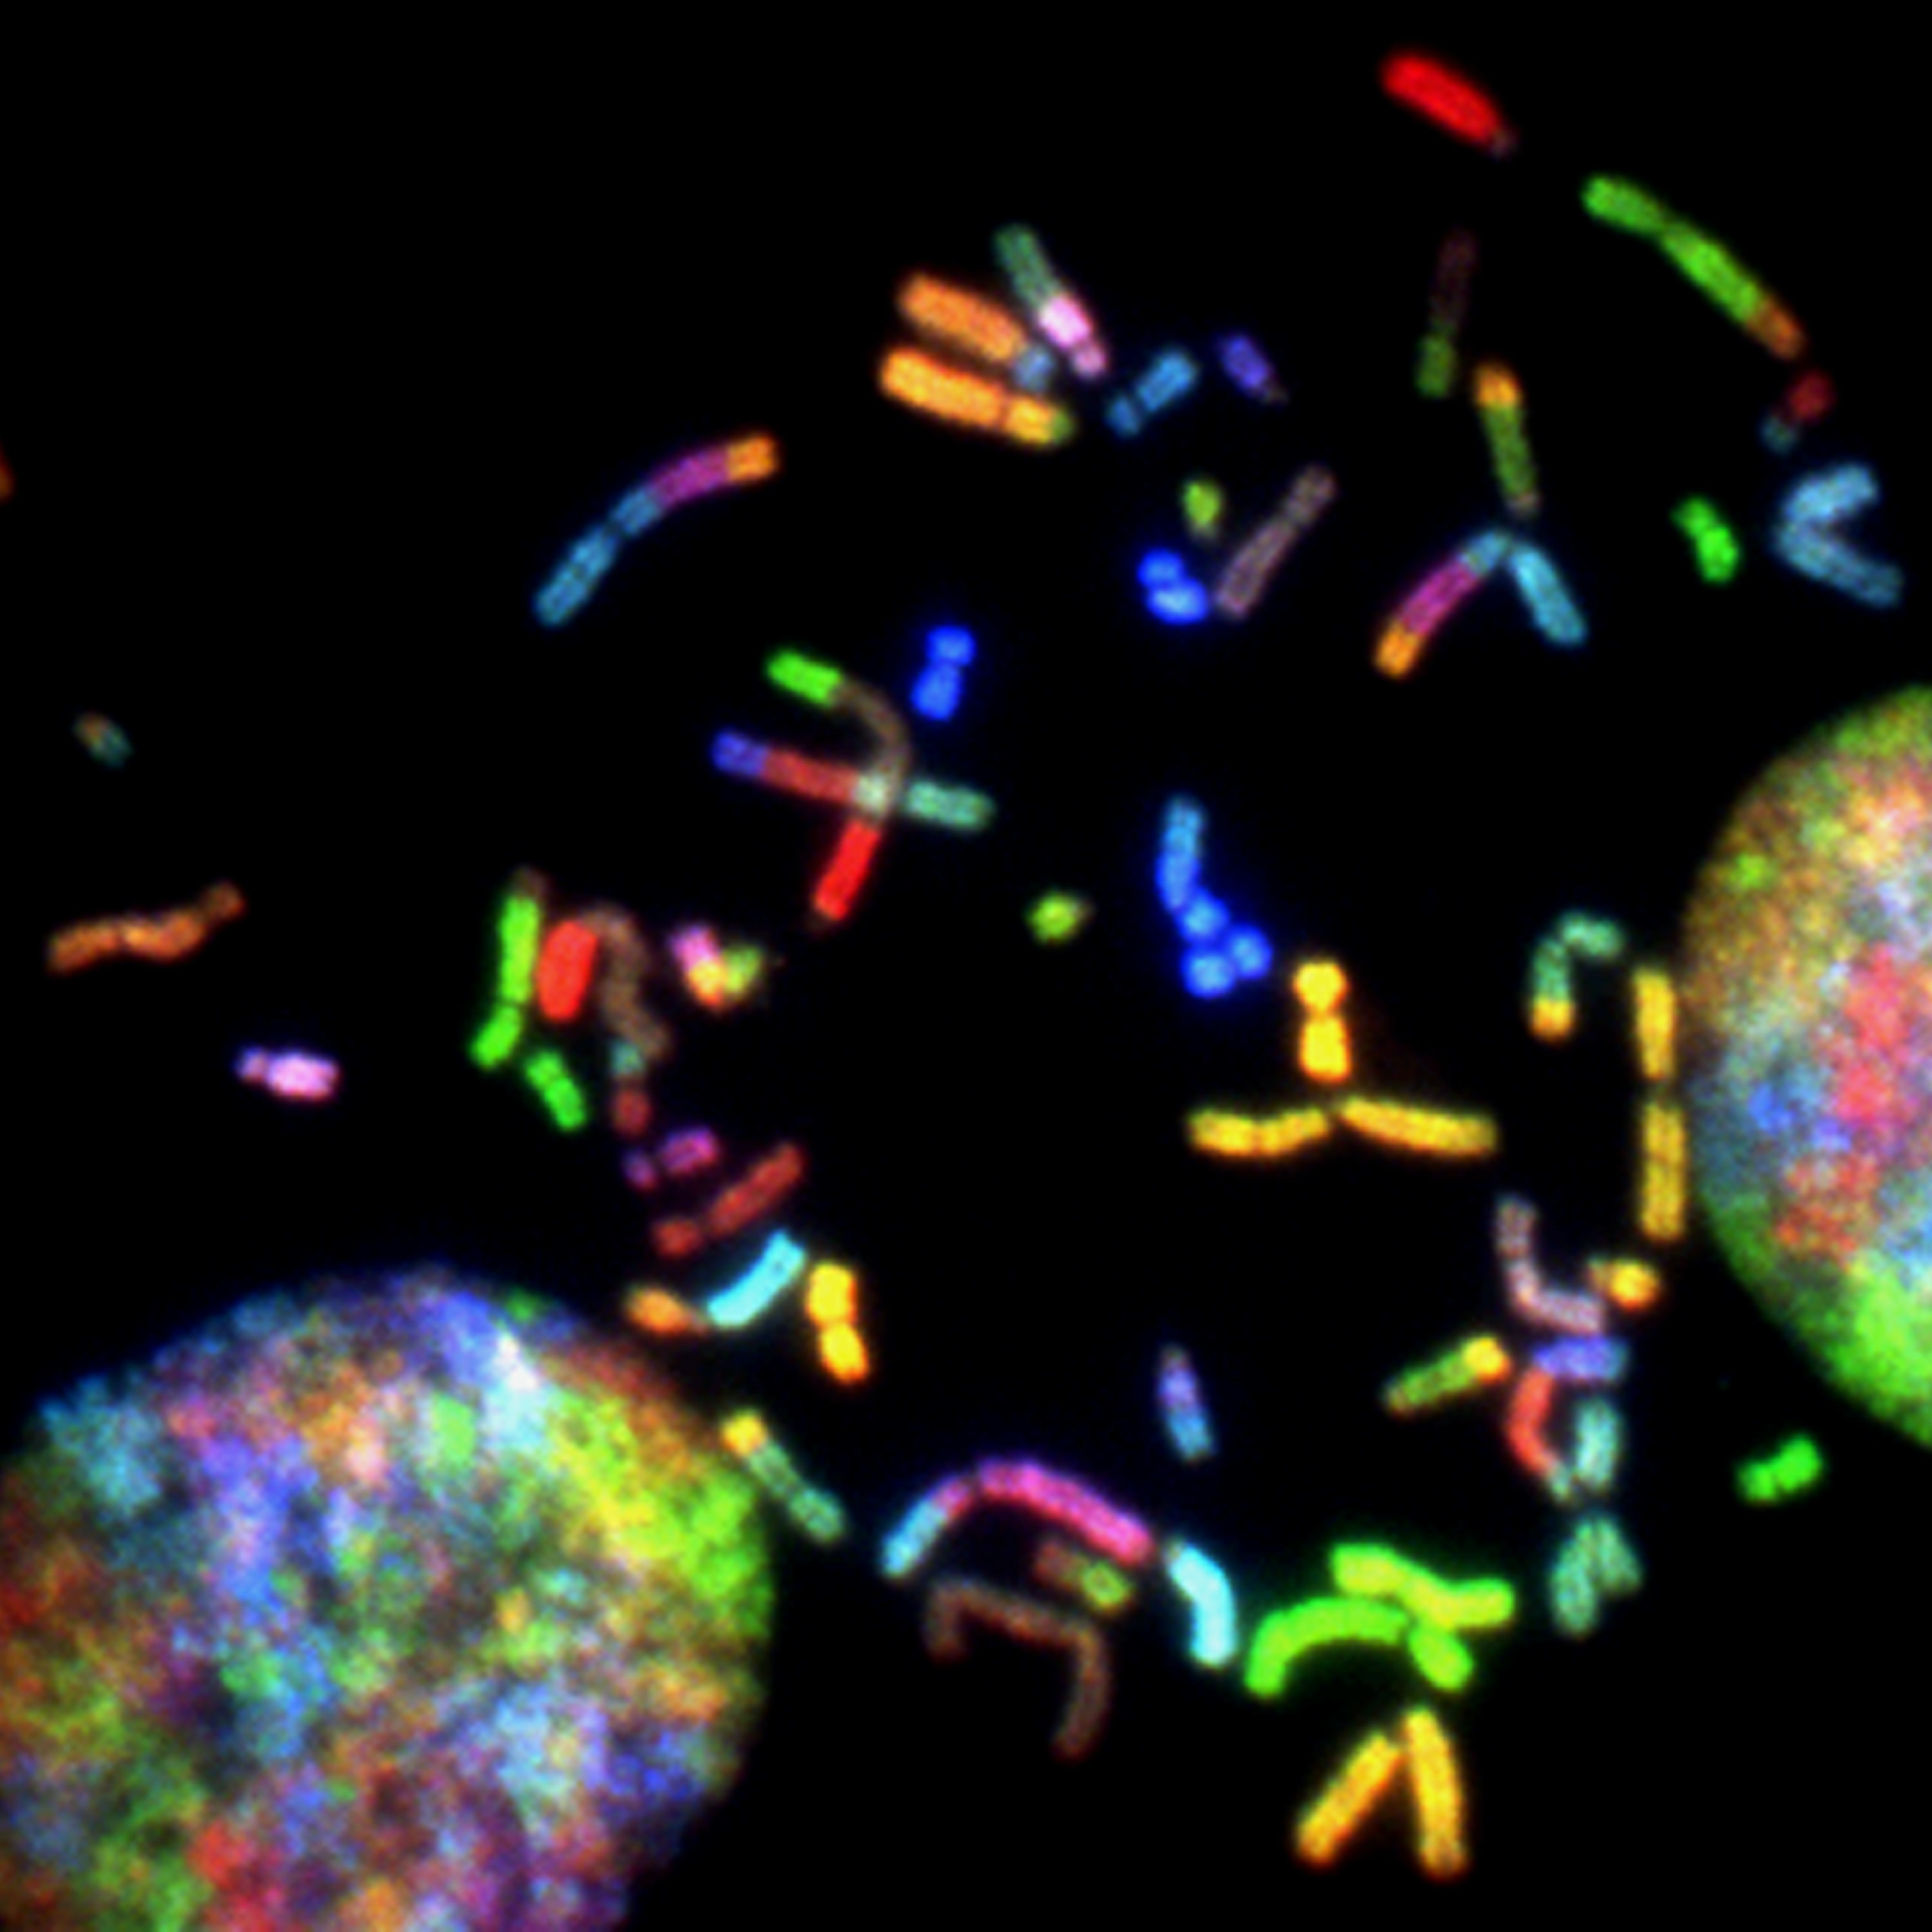 Brain Cancer Chromosomes. Chromosomes prepared from a malignant glioblastoma visualized by spectral karyotyping (SKY) reveal an enormous degree of chromosomal instability -- a hallmark of cancer